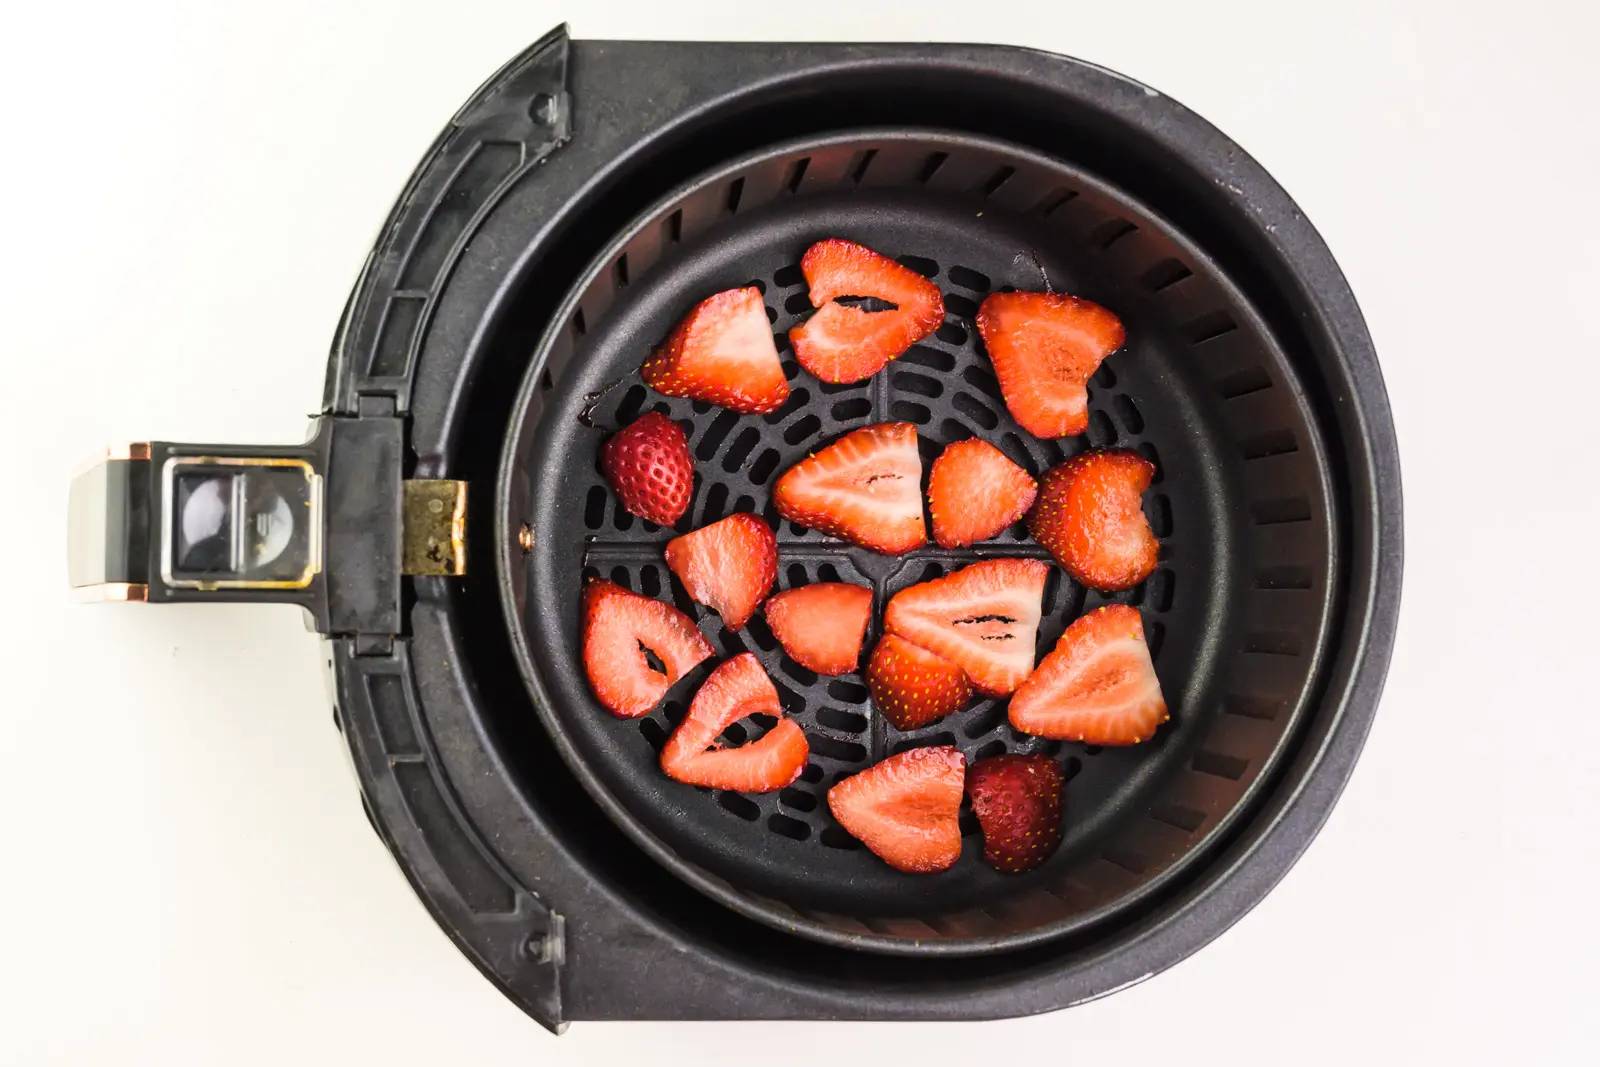 Sliced strawberries are in the bottom of an air fryer basket.